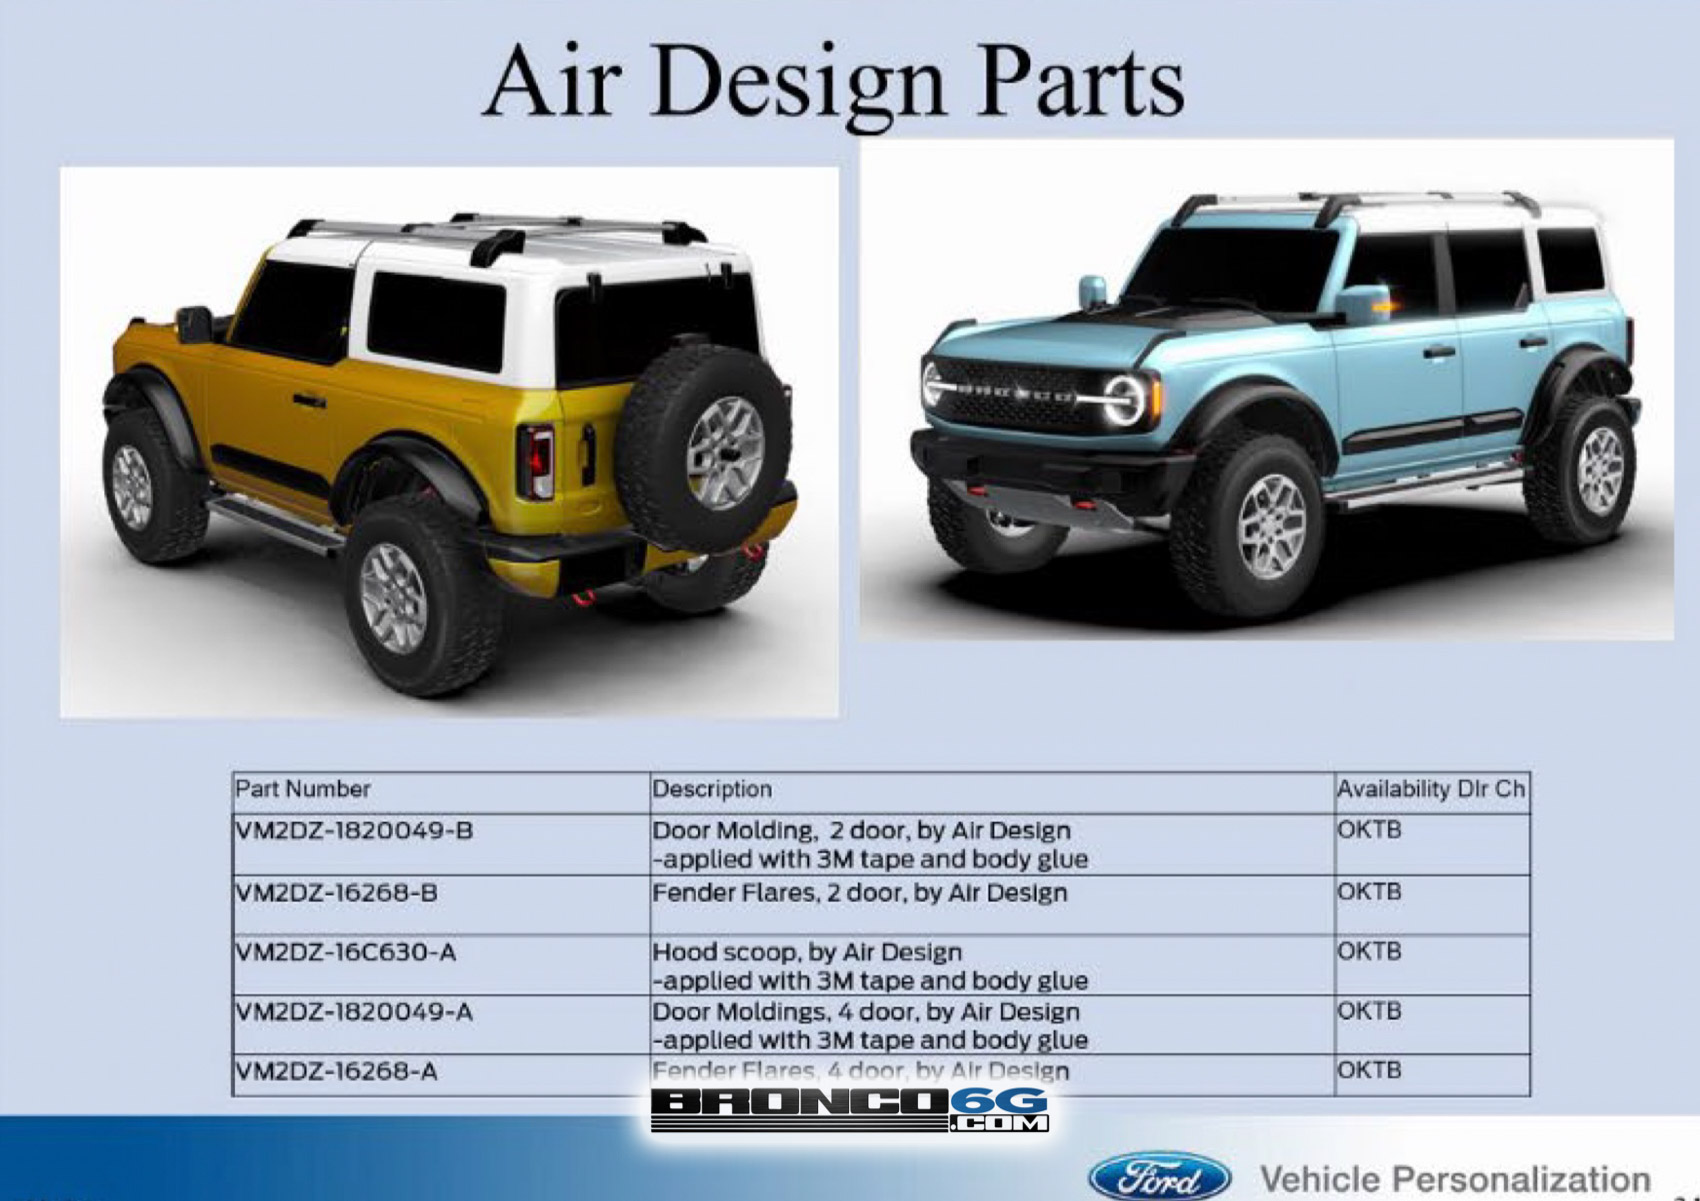 Ford Bronco Introducing Yellowstone - New Color for 2022 Bronco 2021 Bronco Air Design Parts - Door Molding, Hood Scoop, Fender Flares - Ford Performance OEM 